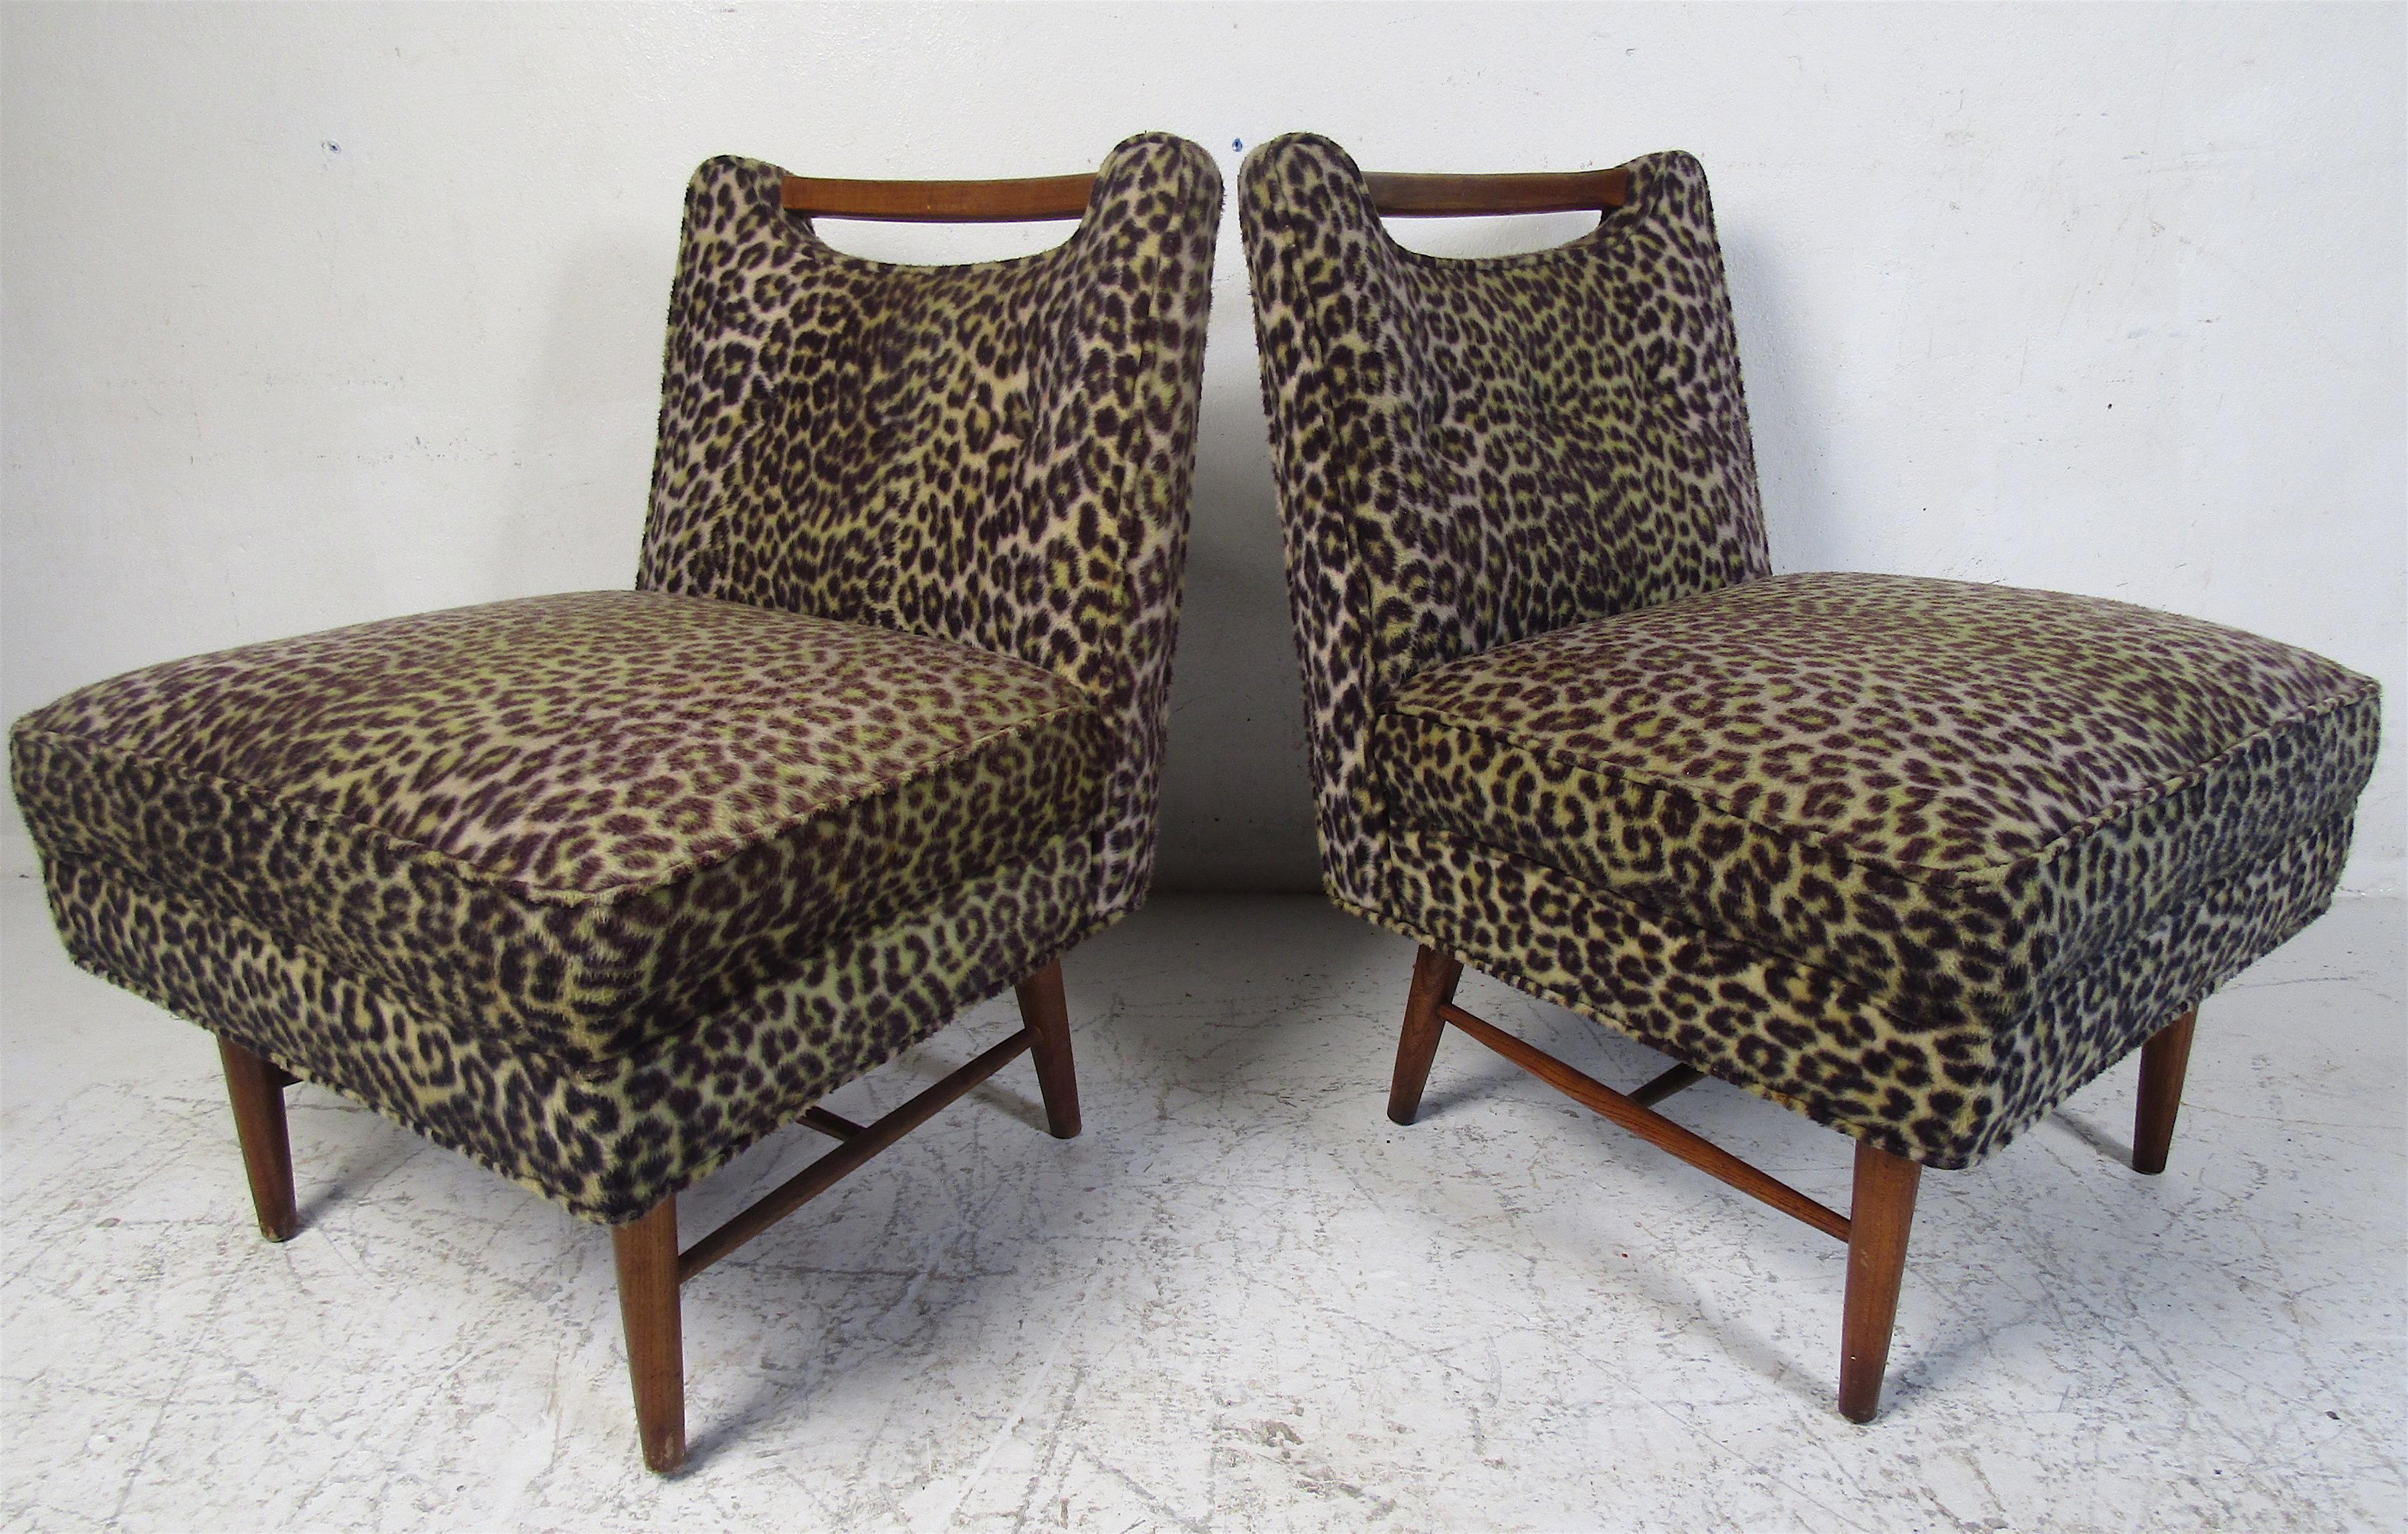 leopard chair and ottoman